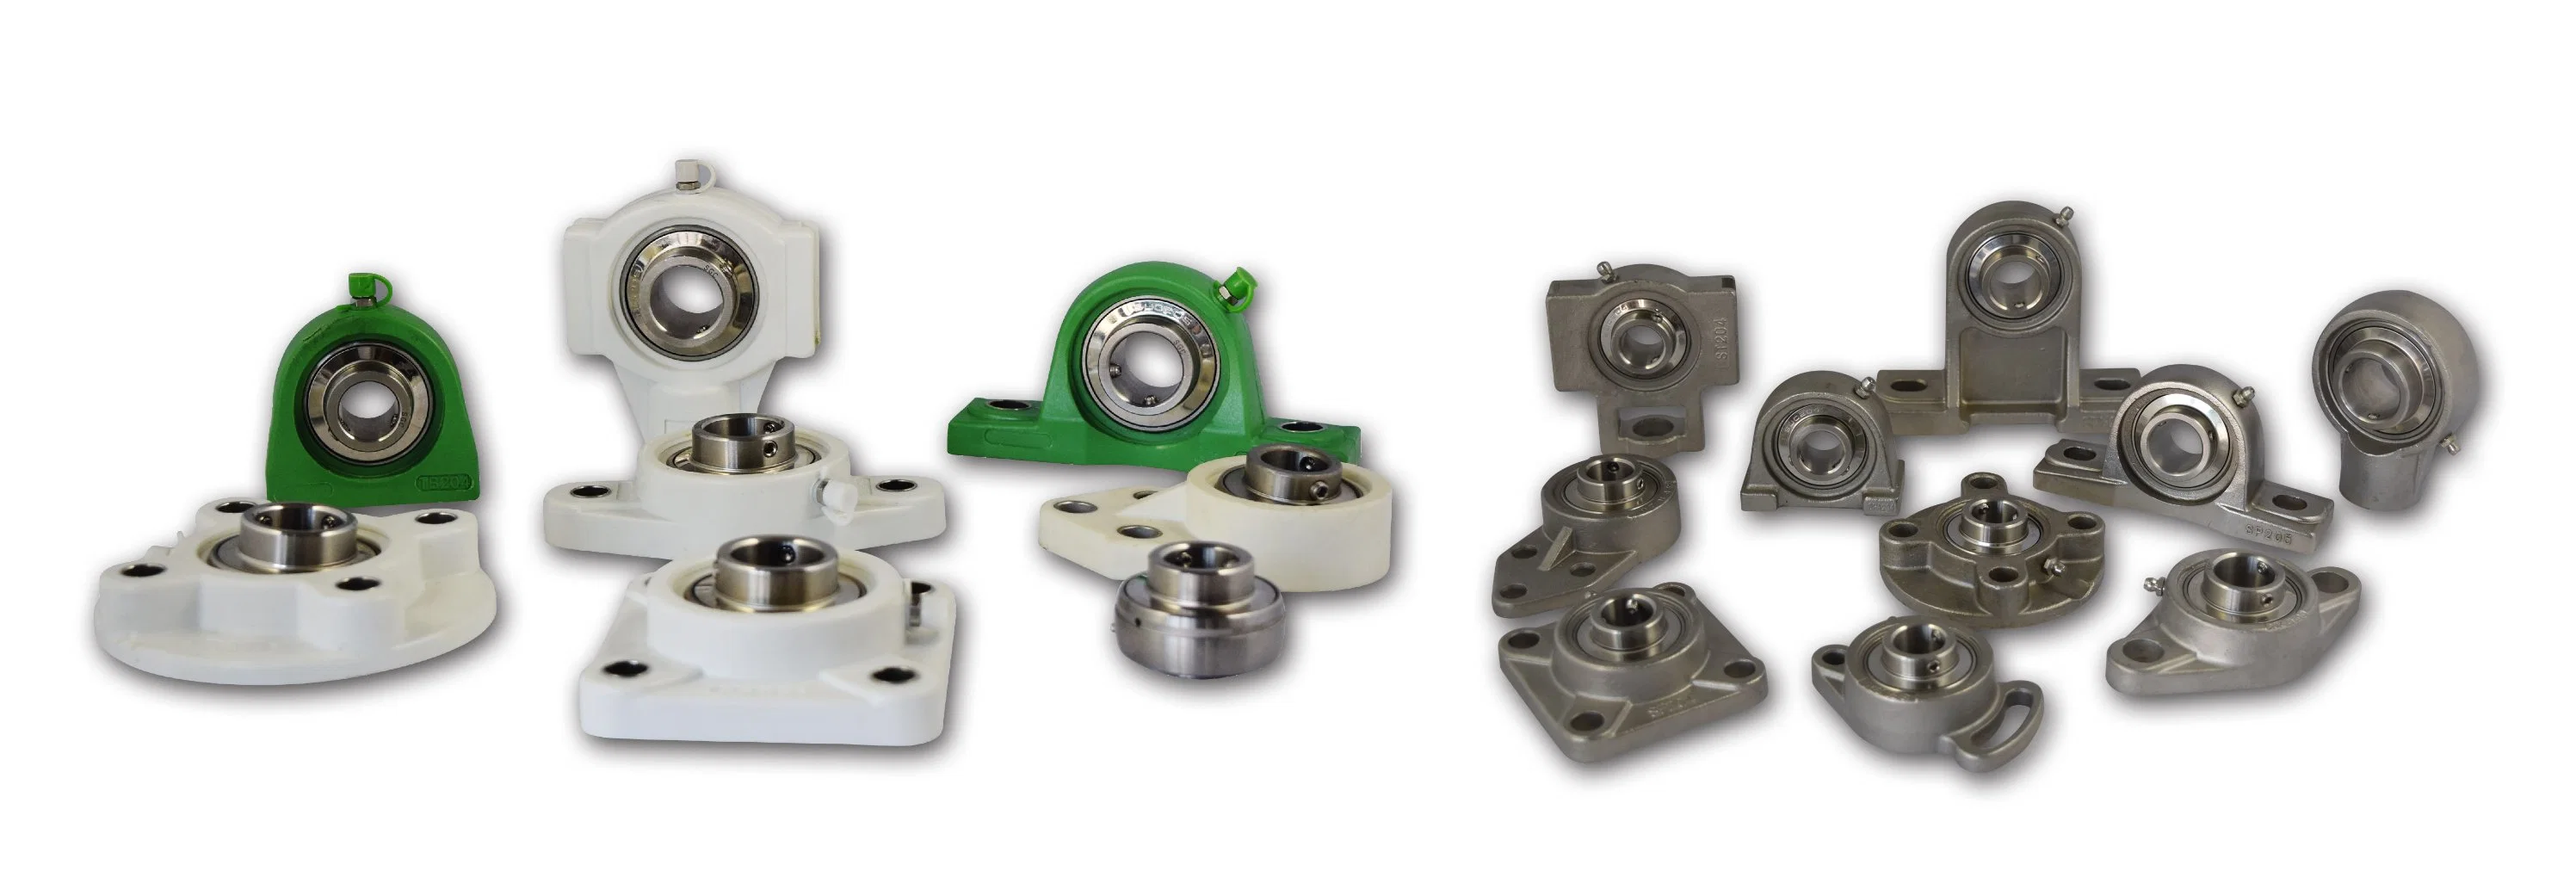 Flange Bracket Bearing Units with Plastic Base and Stainless Ball Bearing for Hard Working Environment